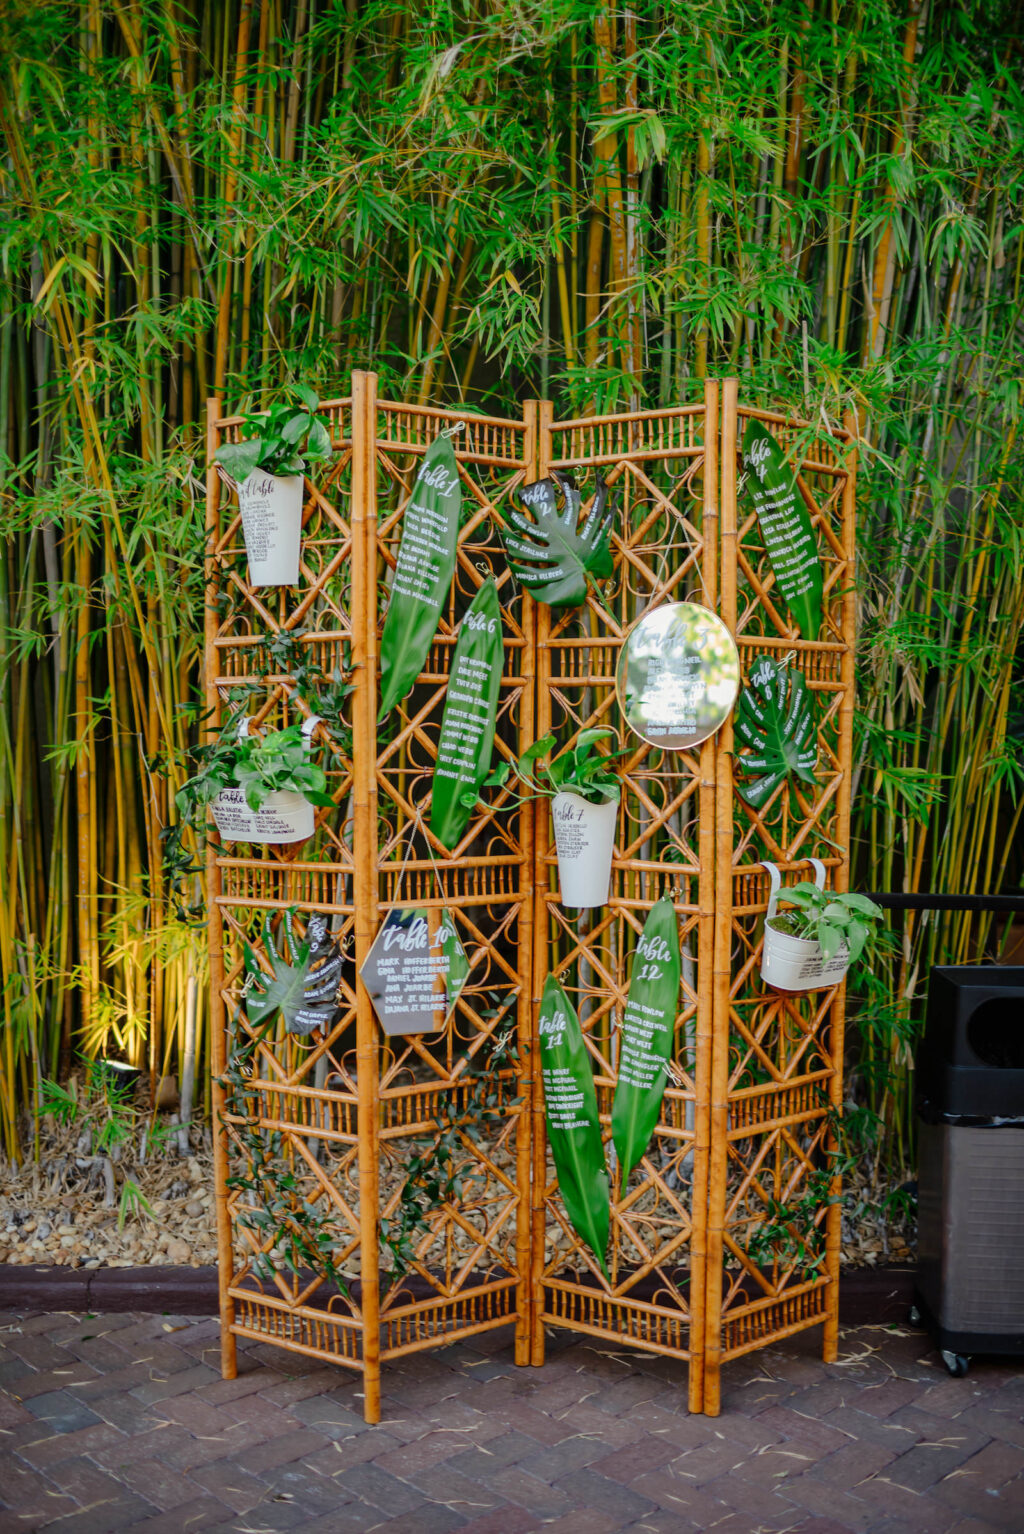 Tropical Inspired Florida Wedding Reception and Decor, Bamboo Seating Chart with Calligraphy on Plant Leafs| Unique Florida Wedding Venue NOVA 535 in Downtown St. Pete